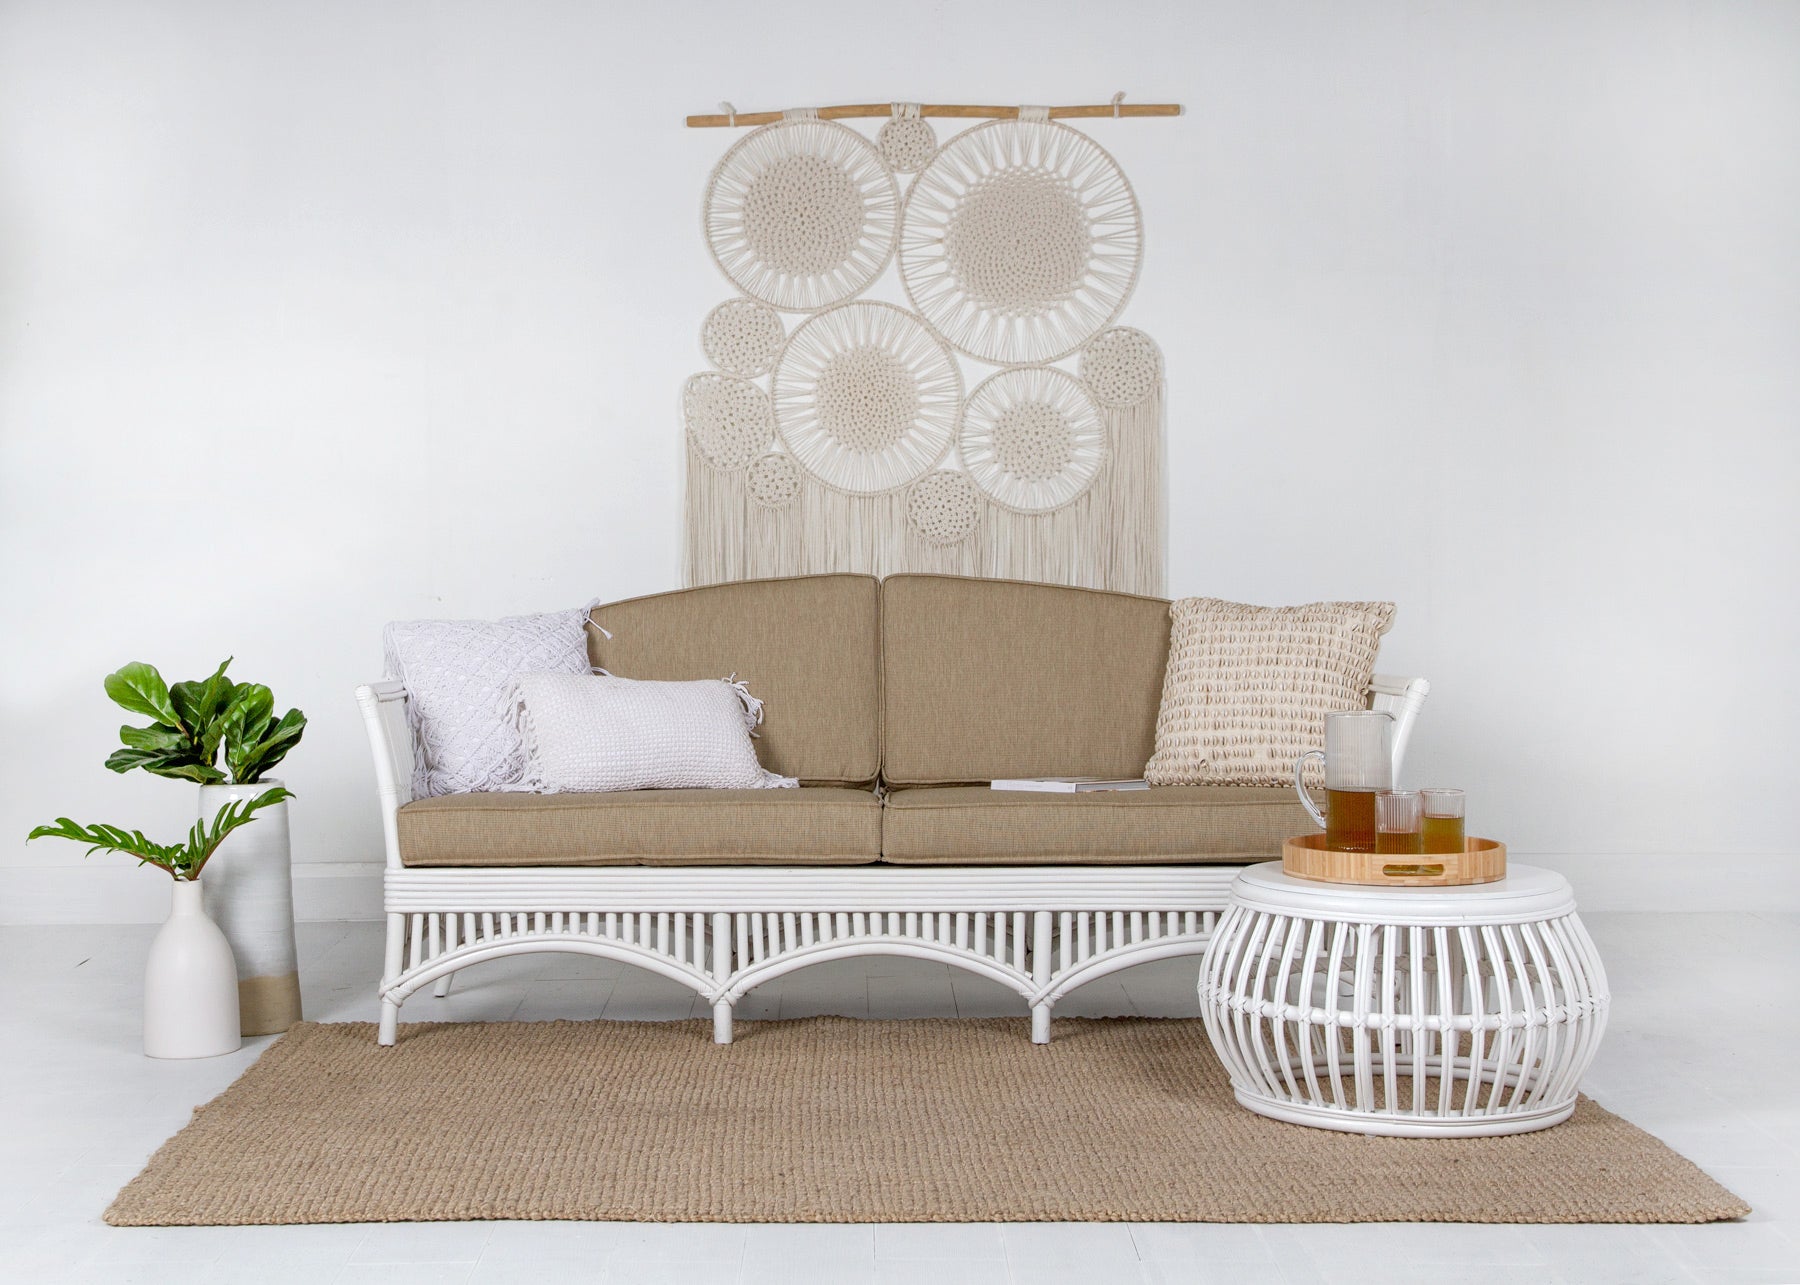 Kuranda Daybed in white - styled with white accents